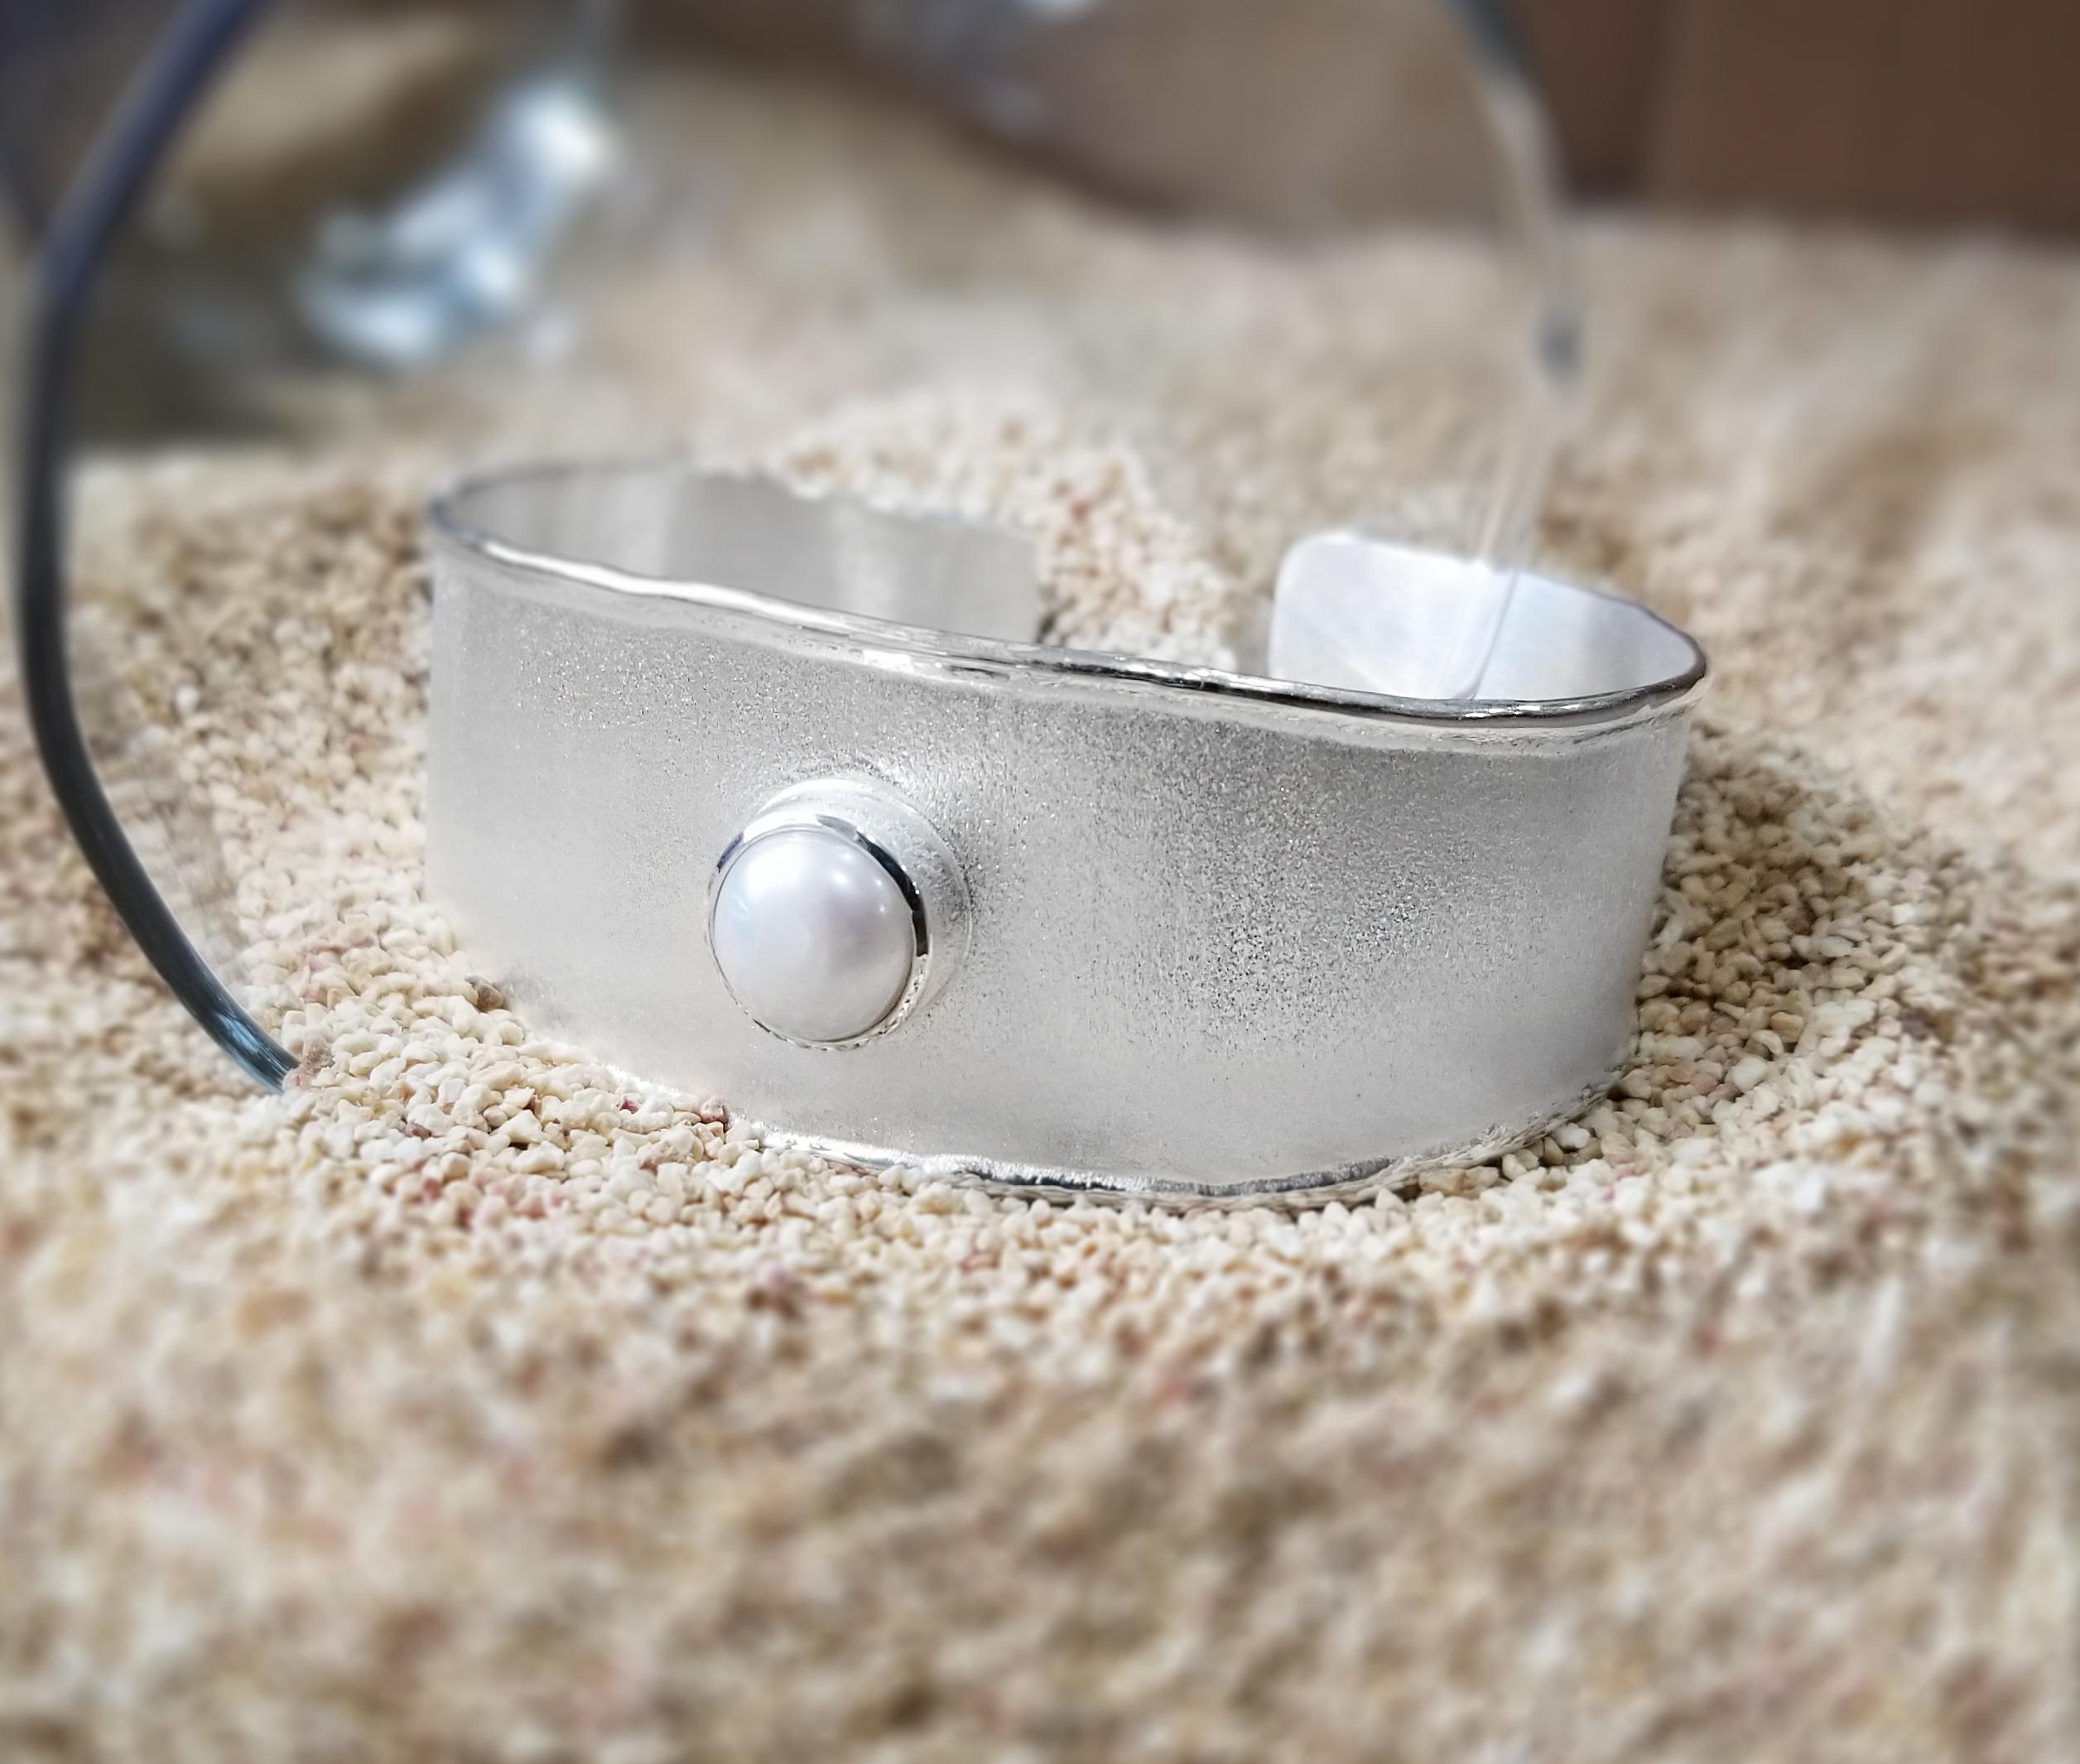 Yianni Creations 100% Handmade Bracelet from Fine Silver featuring 9 -9.5 mm Freshwater Pearl complemented by unique techniques of craftsmanship - brushed texture and nature-inspired liquid edges. The core of this beautiful simplified bracelet is